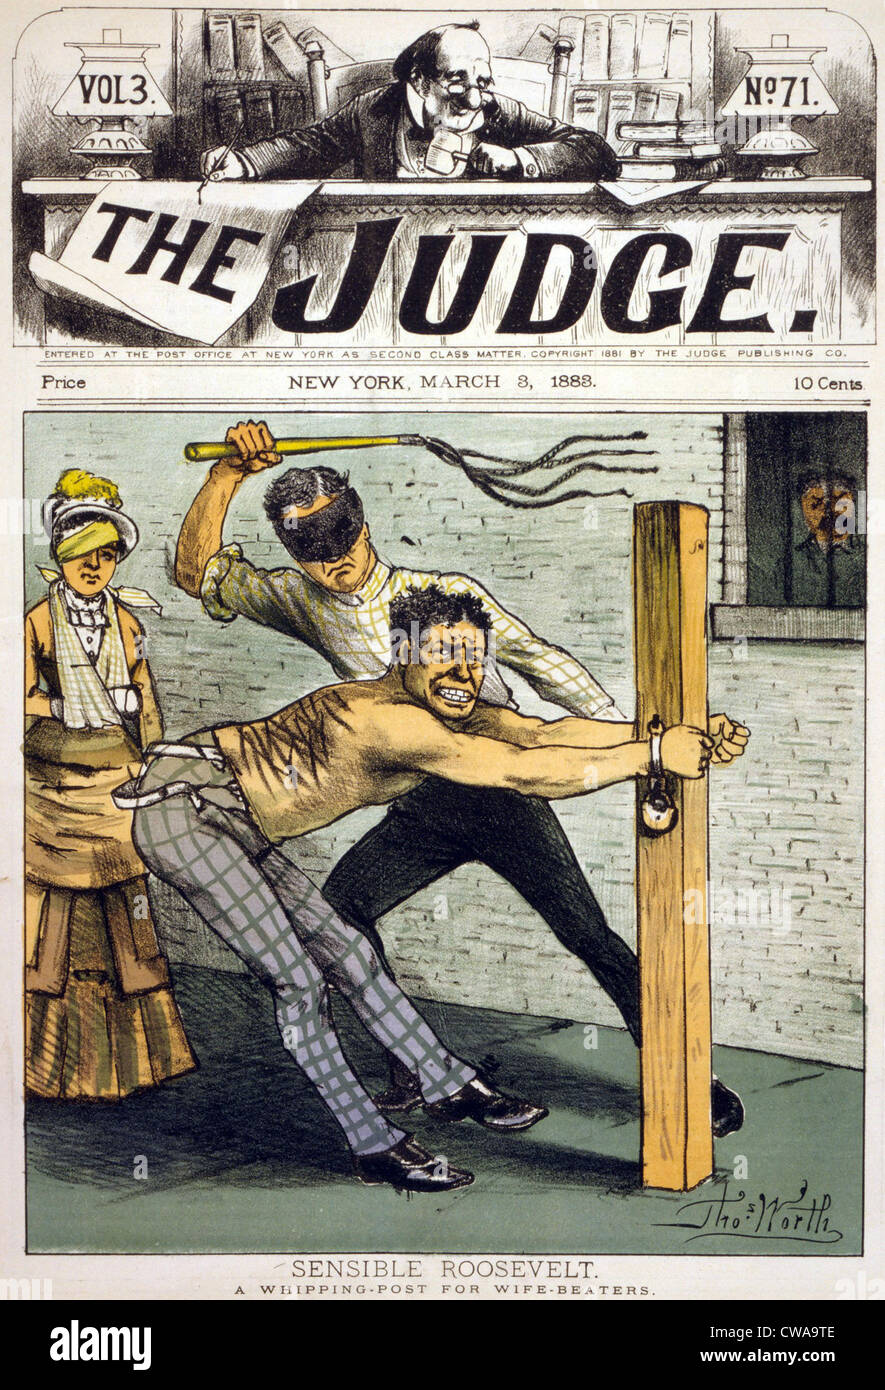 Theodore Roosevelt advocated a whipping post for men who beat their wives. This cartoon illustration shows a man manacled to Stock Photo